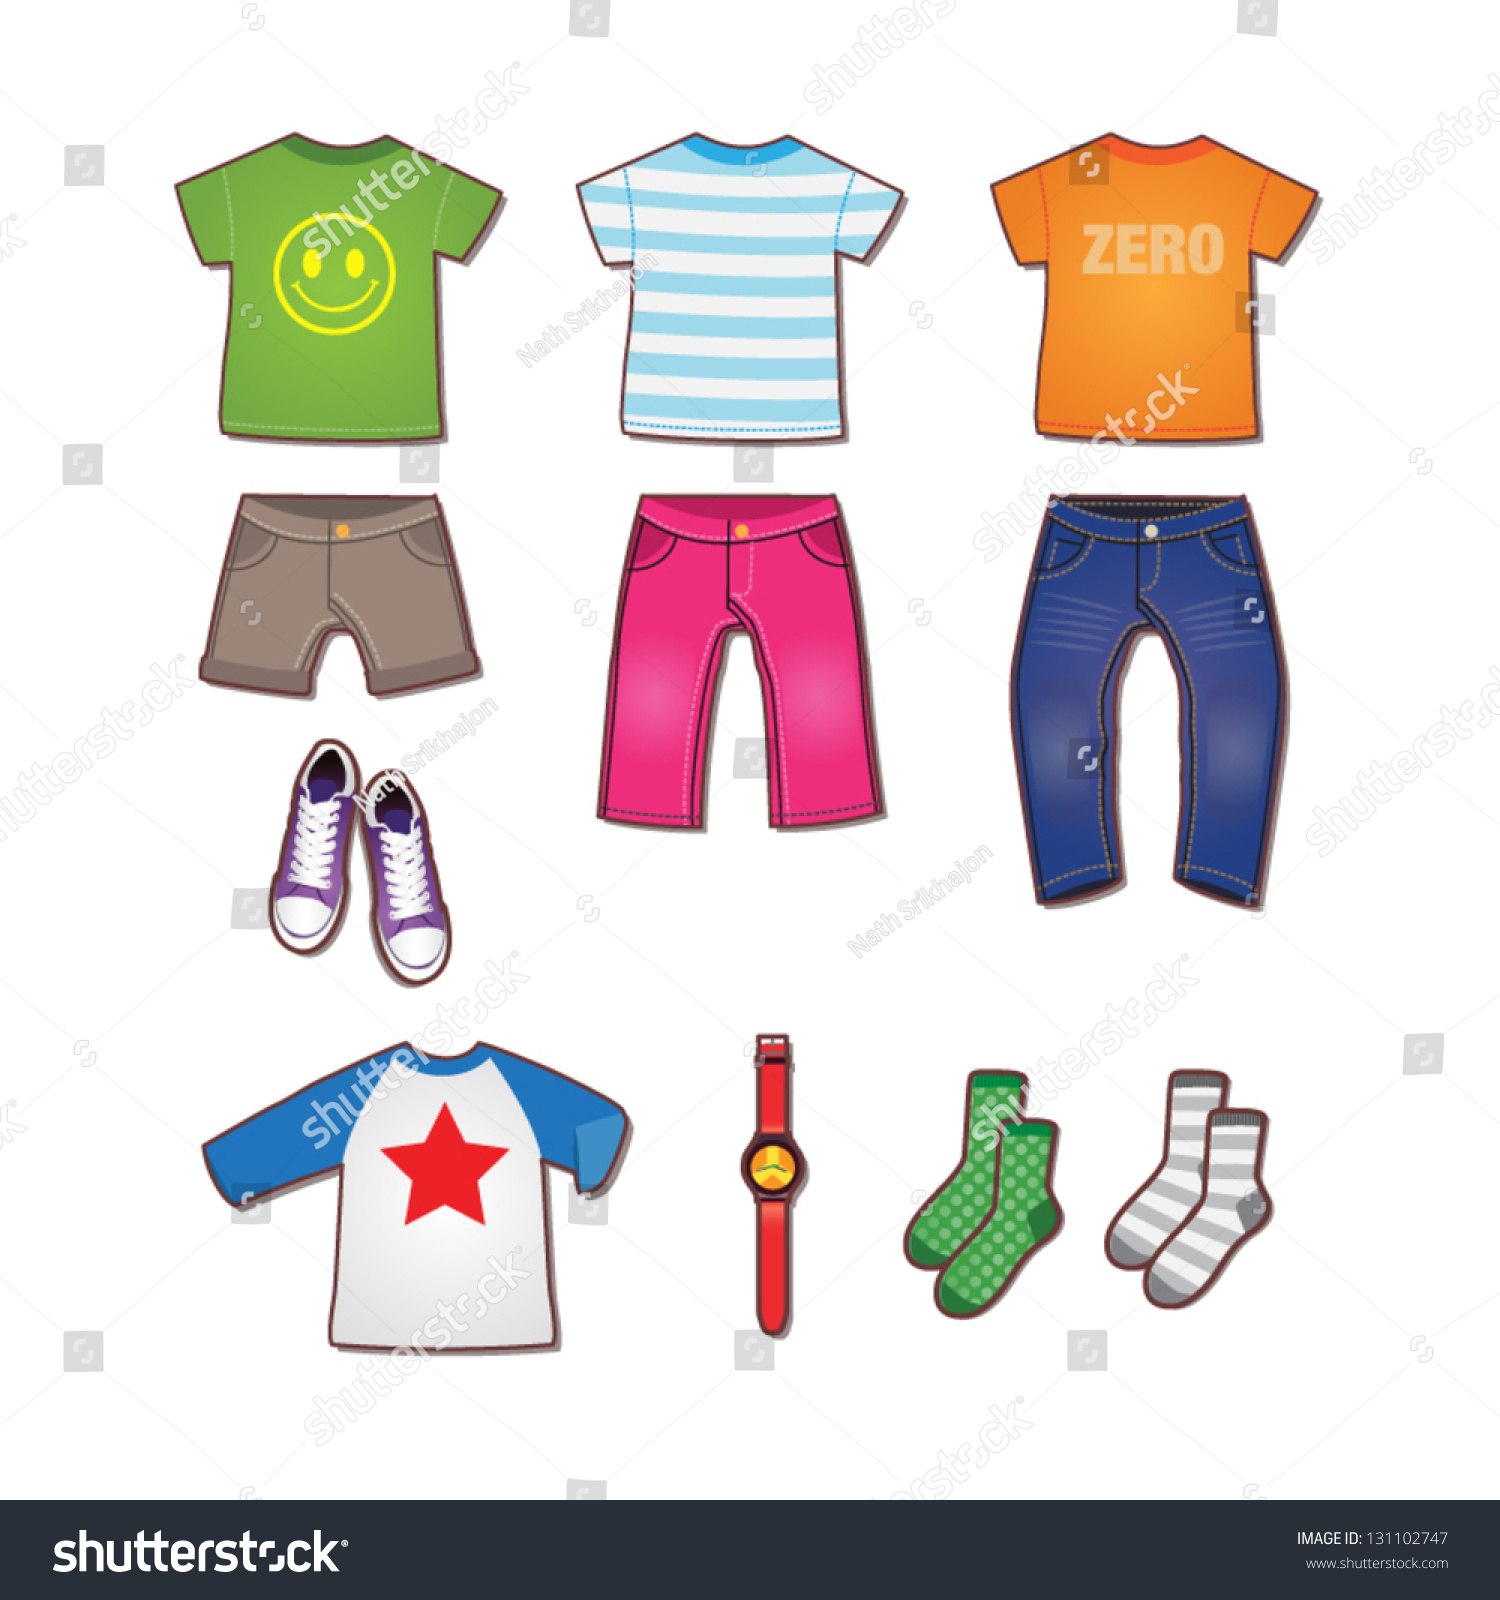 Colorful Teenage Clothes Illustration - 131102747 : Shutterstock